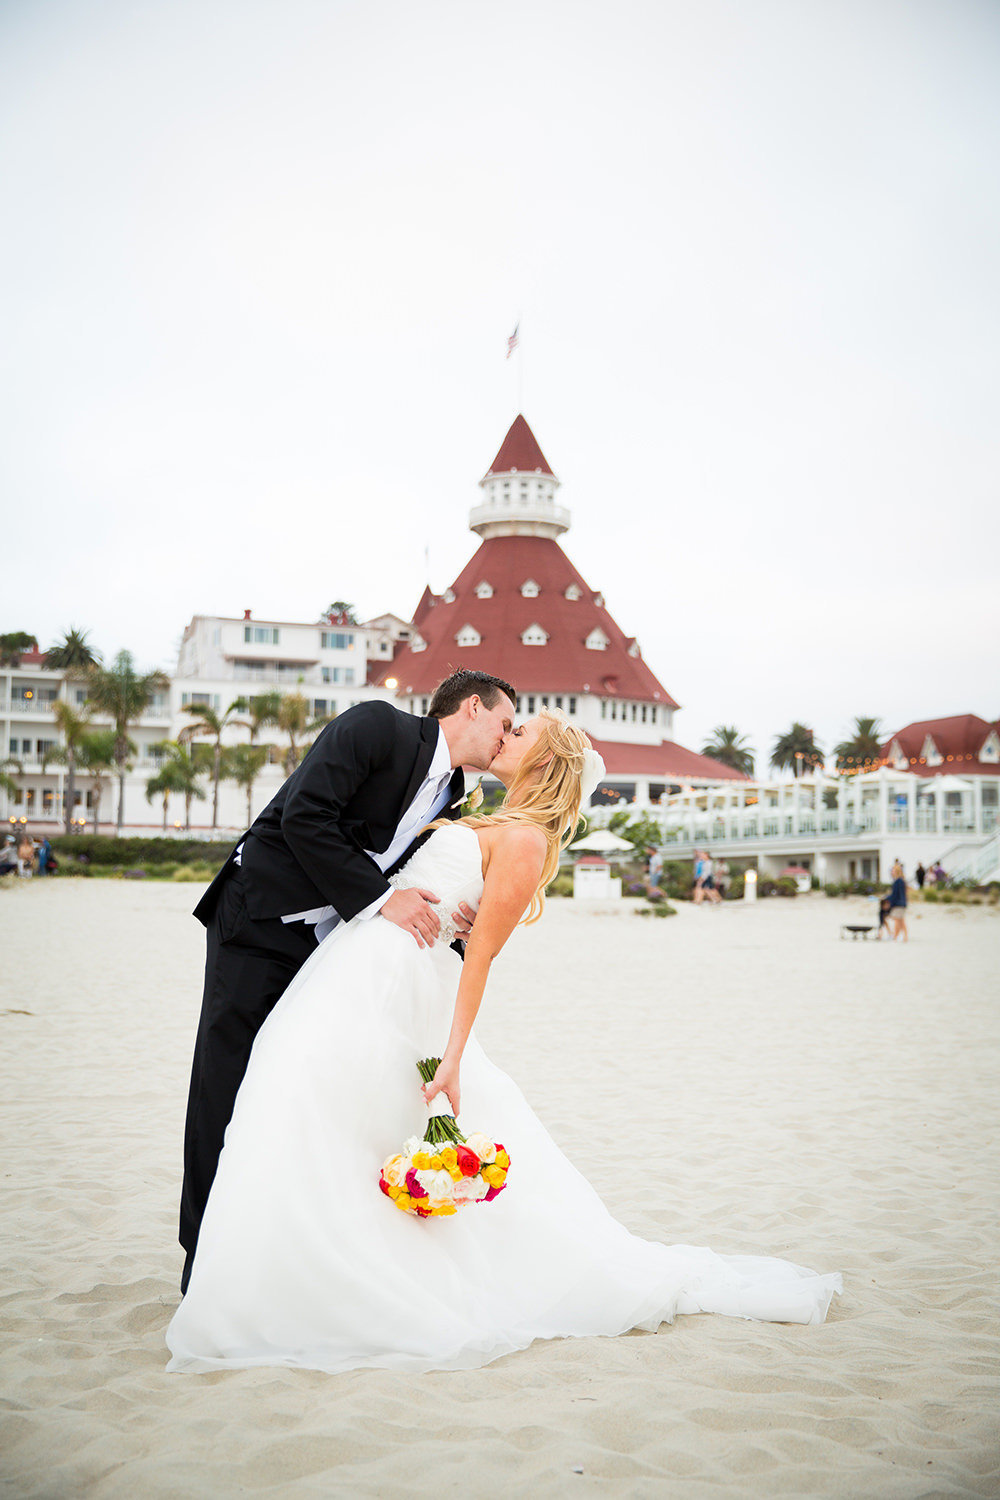 Dip Kiss on the beach in front of the Hotel Del Coronado